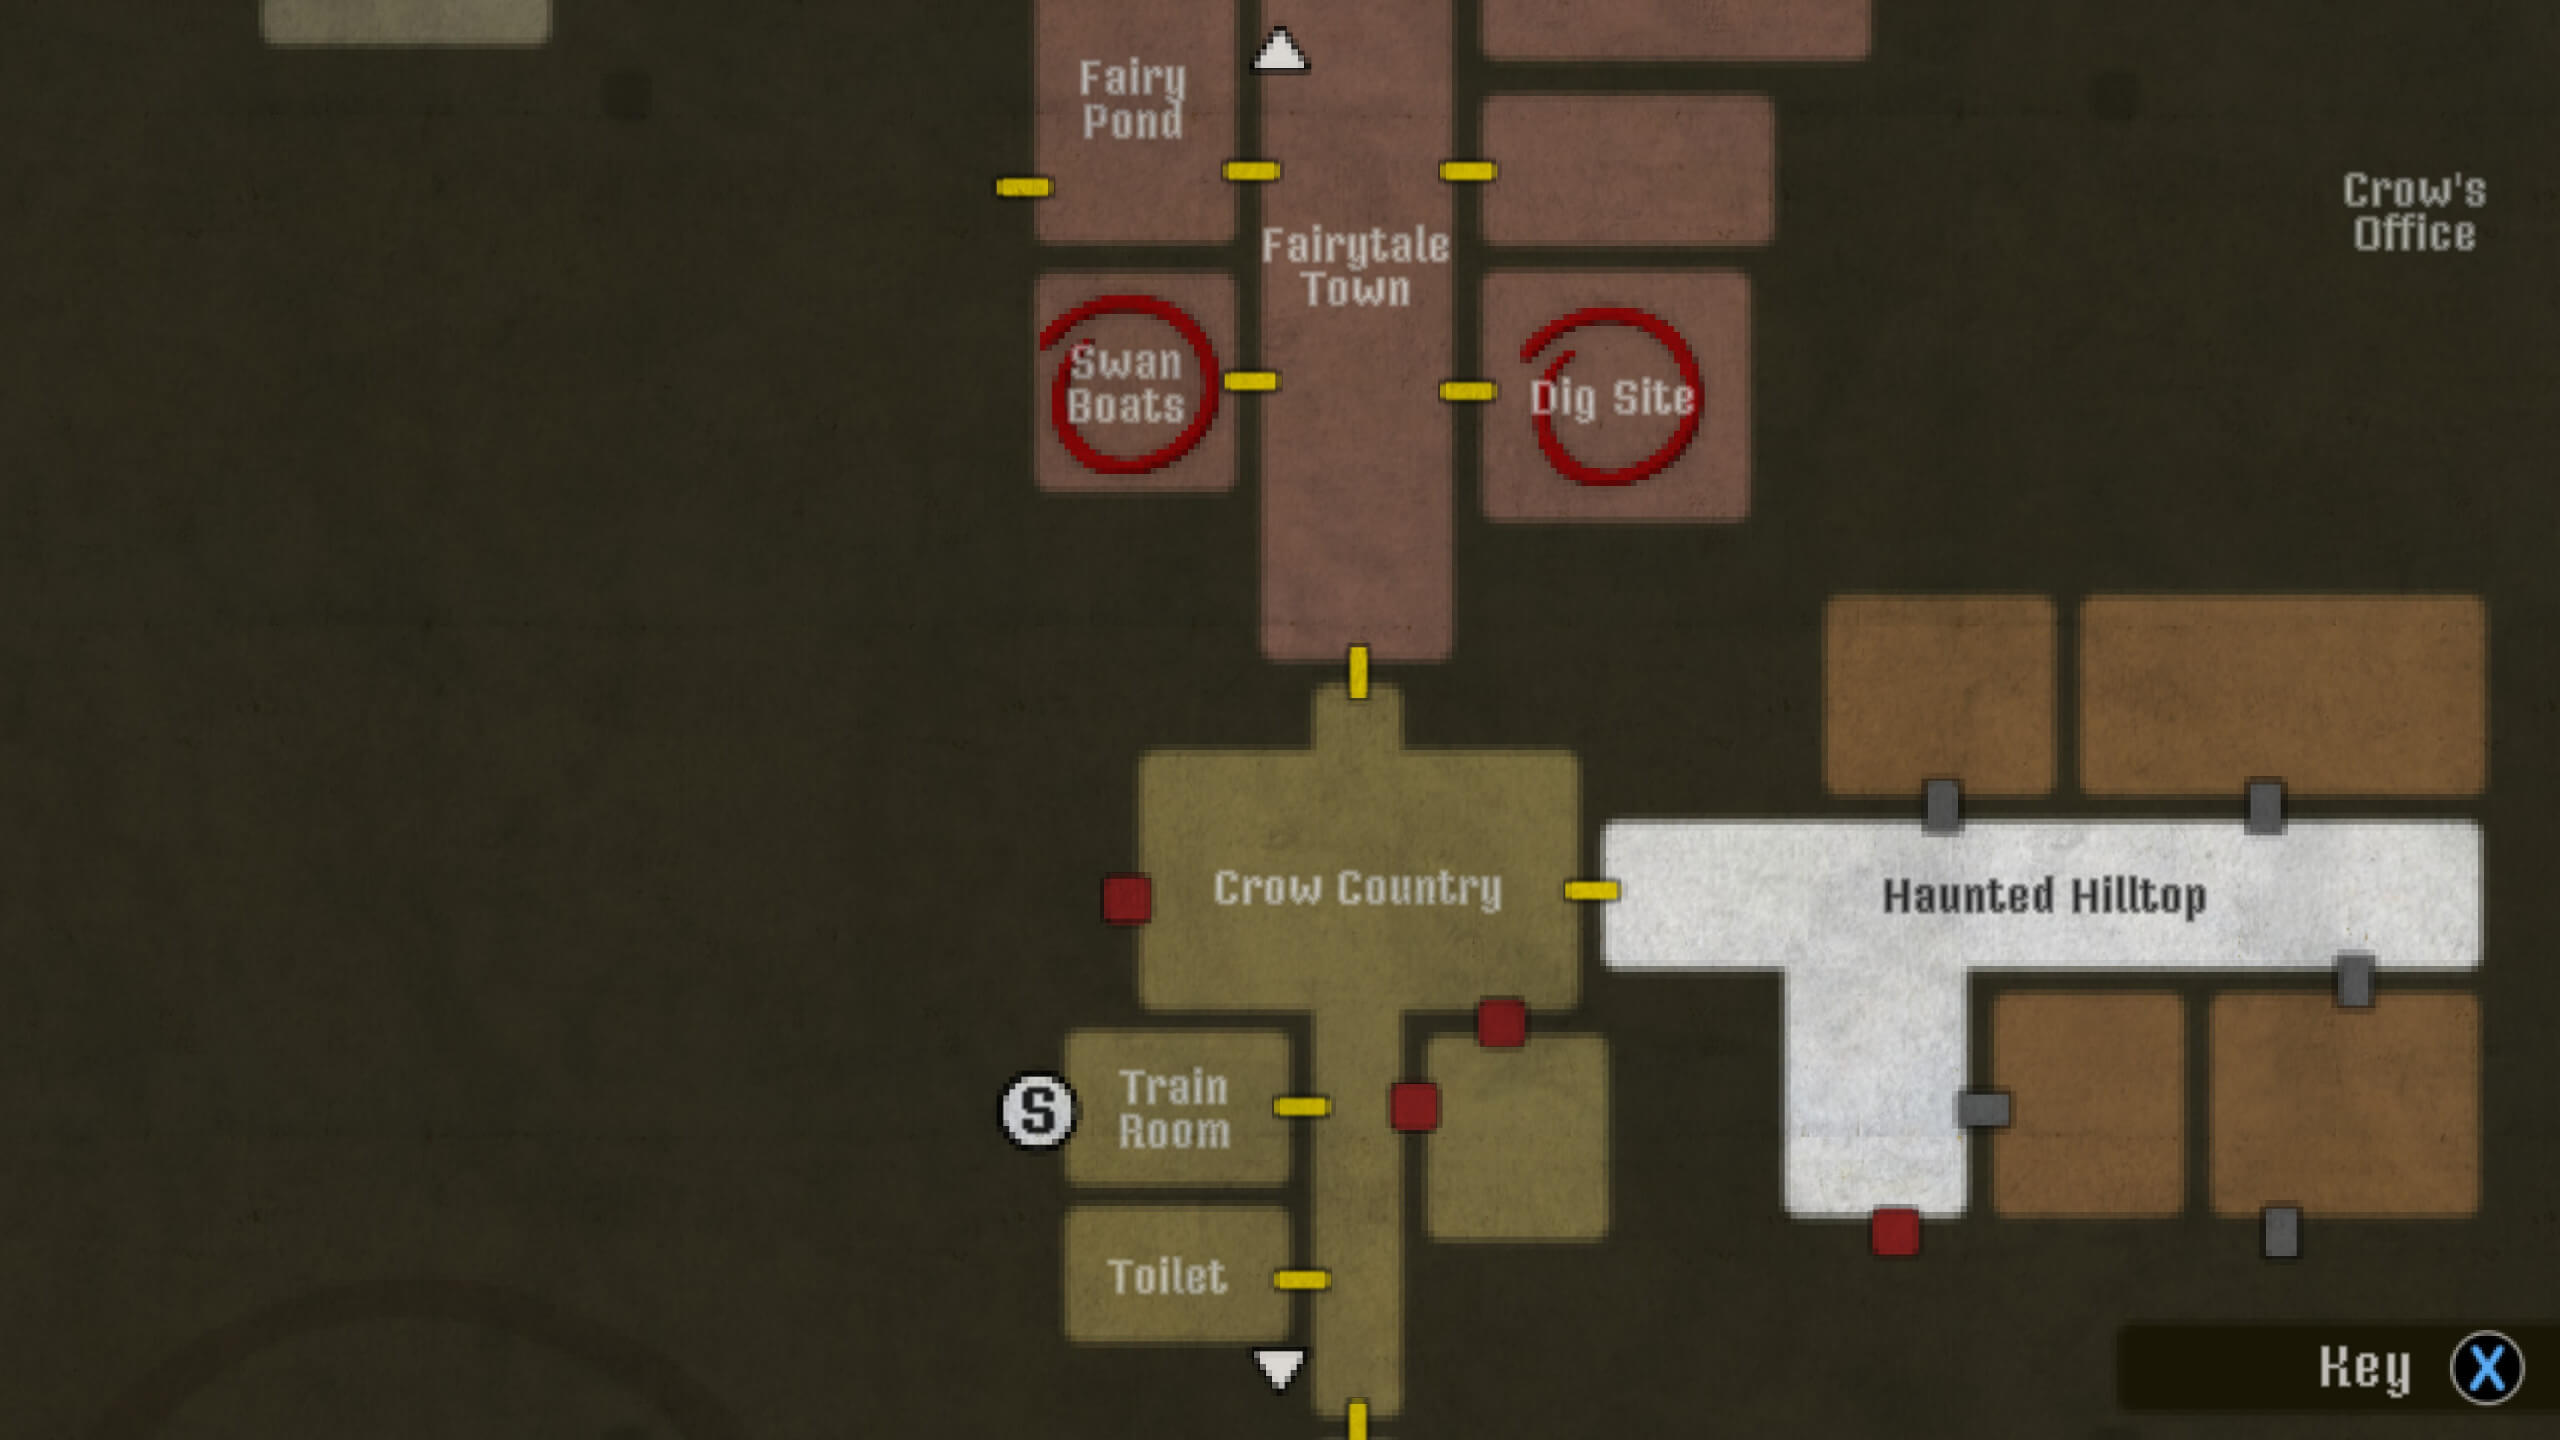 Some of the map I have unlocked. There are various areas with title saying what they are. The red blocks mean the doors are locked while the red circles mean there is an unsolved puzzle.